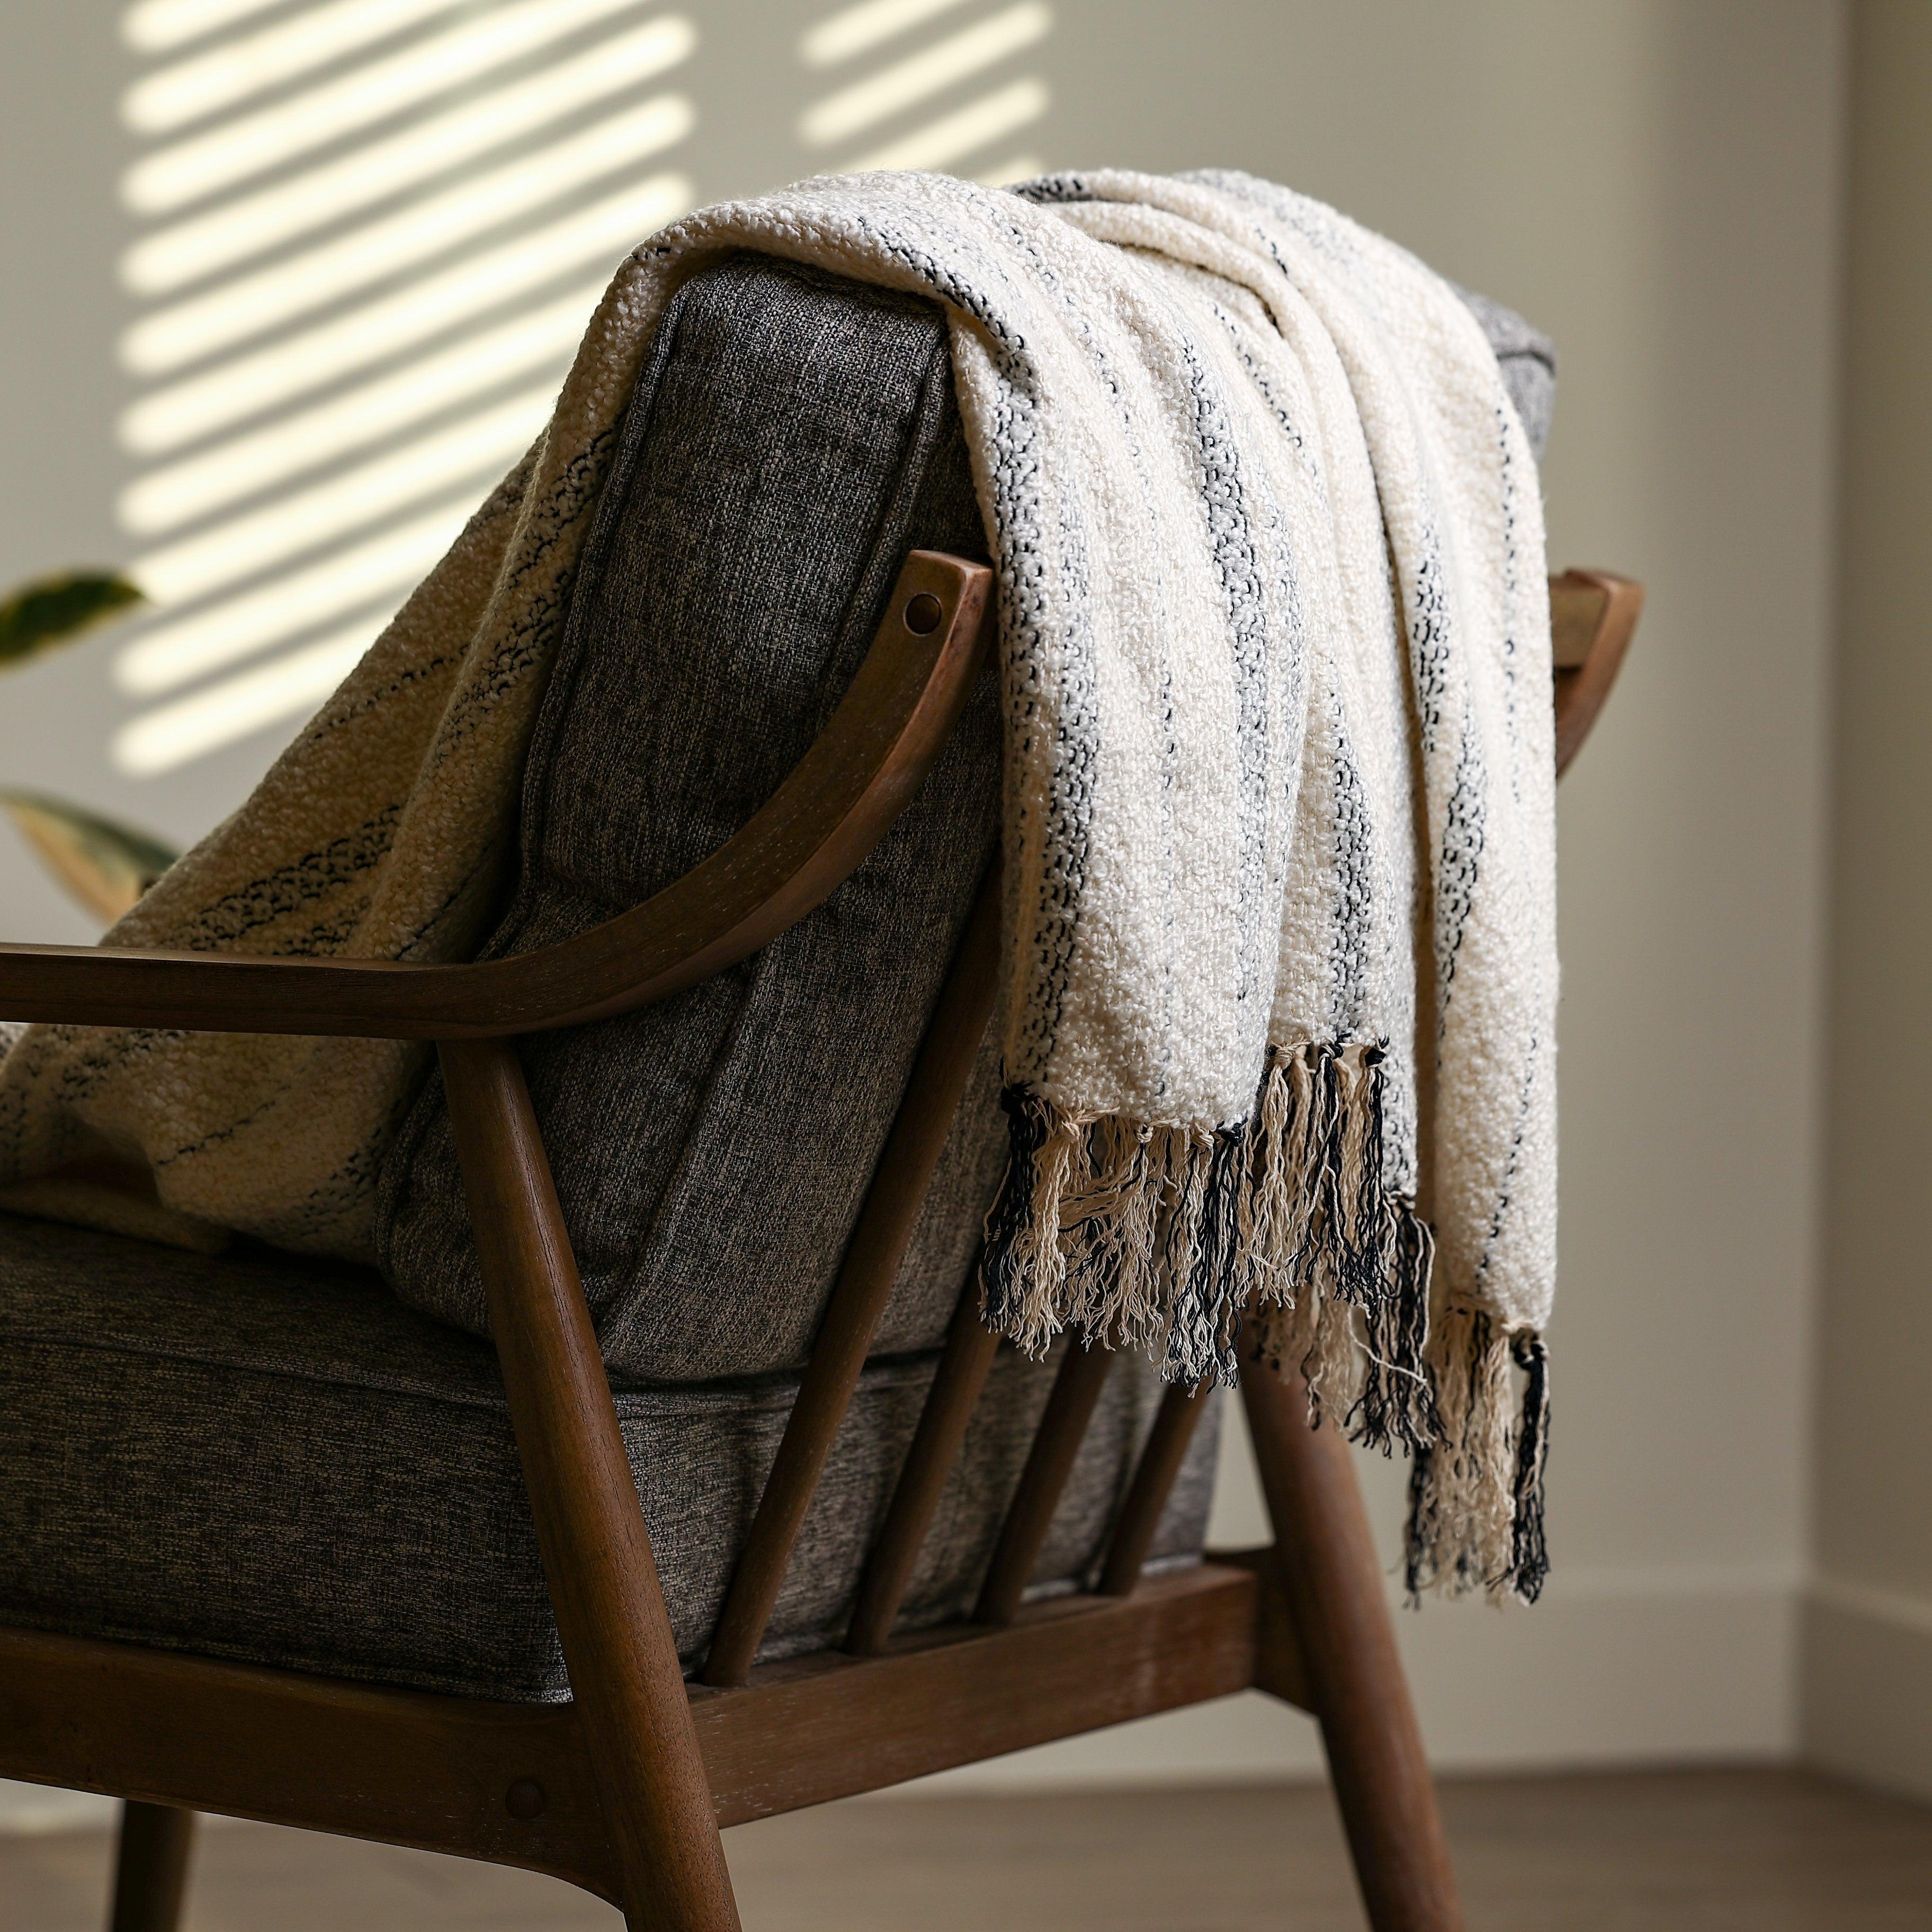 VERY SOFT THROW BLANKET WHITH SUBTLE STRIPES - Boucle Home